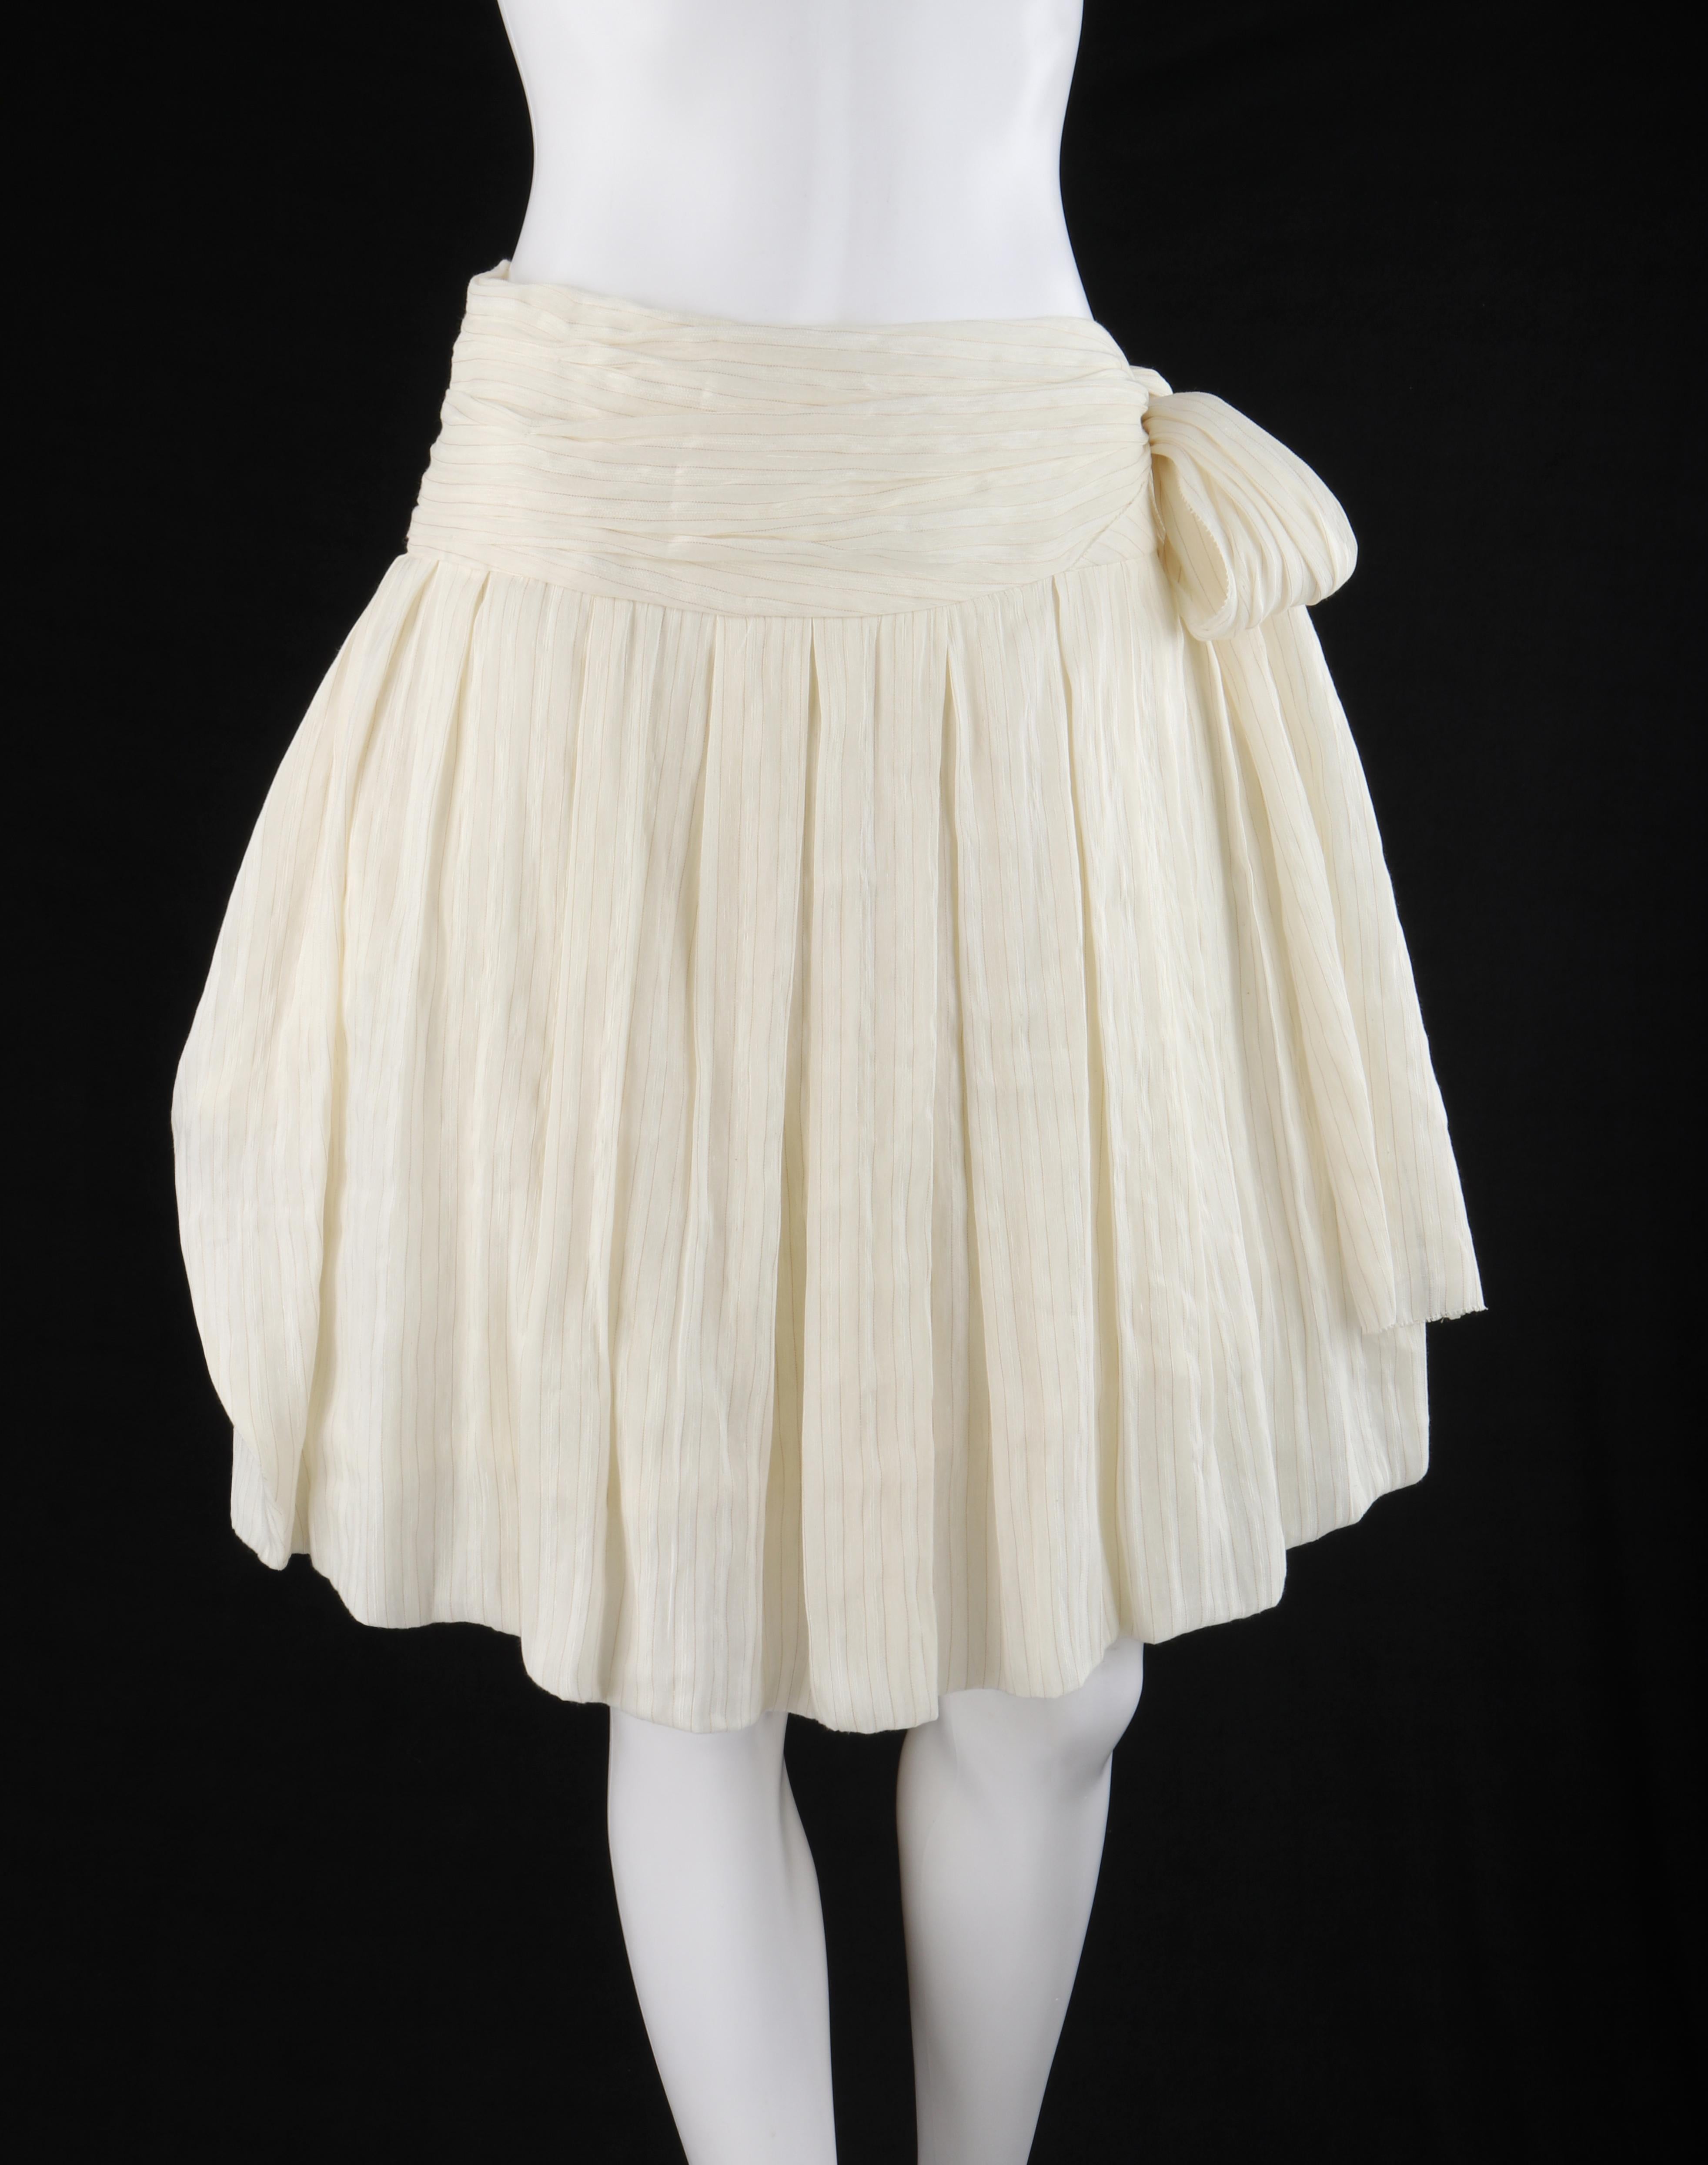 ALEXANDER McQUEEN S/S 2006 “Neptune” Ivory Gold Crepe Pinstripe Sash Tie Skirt

Brand / Manufacturer: Alexander McQueen
Collection: S/S 2006 “Neptune”
Designer: Alexander McQueen
Style: Semi-full pleated circle skirt with attached sash tie